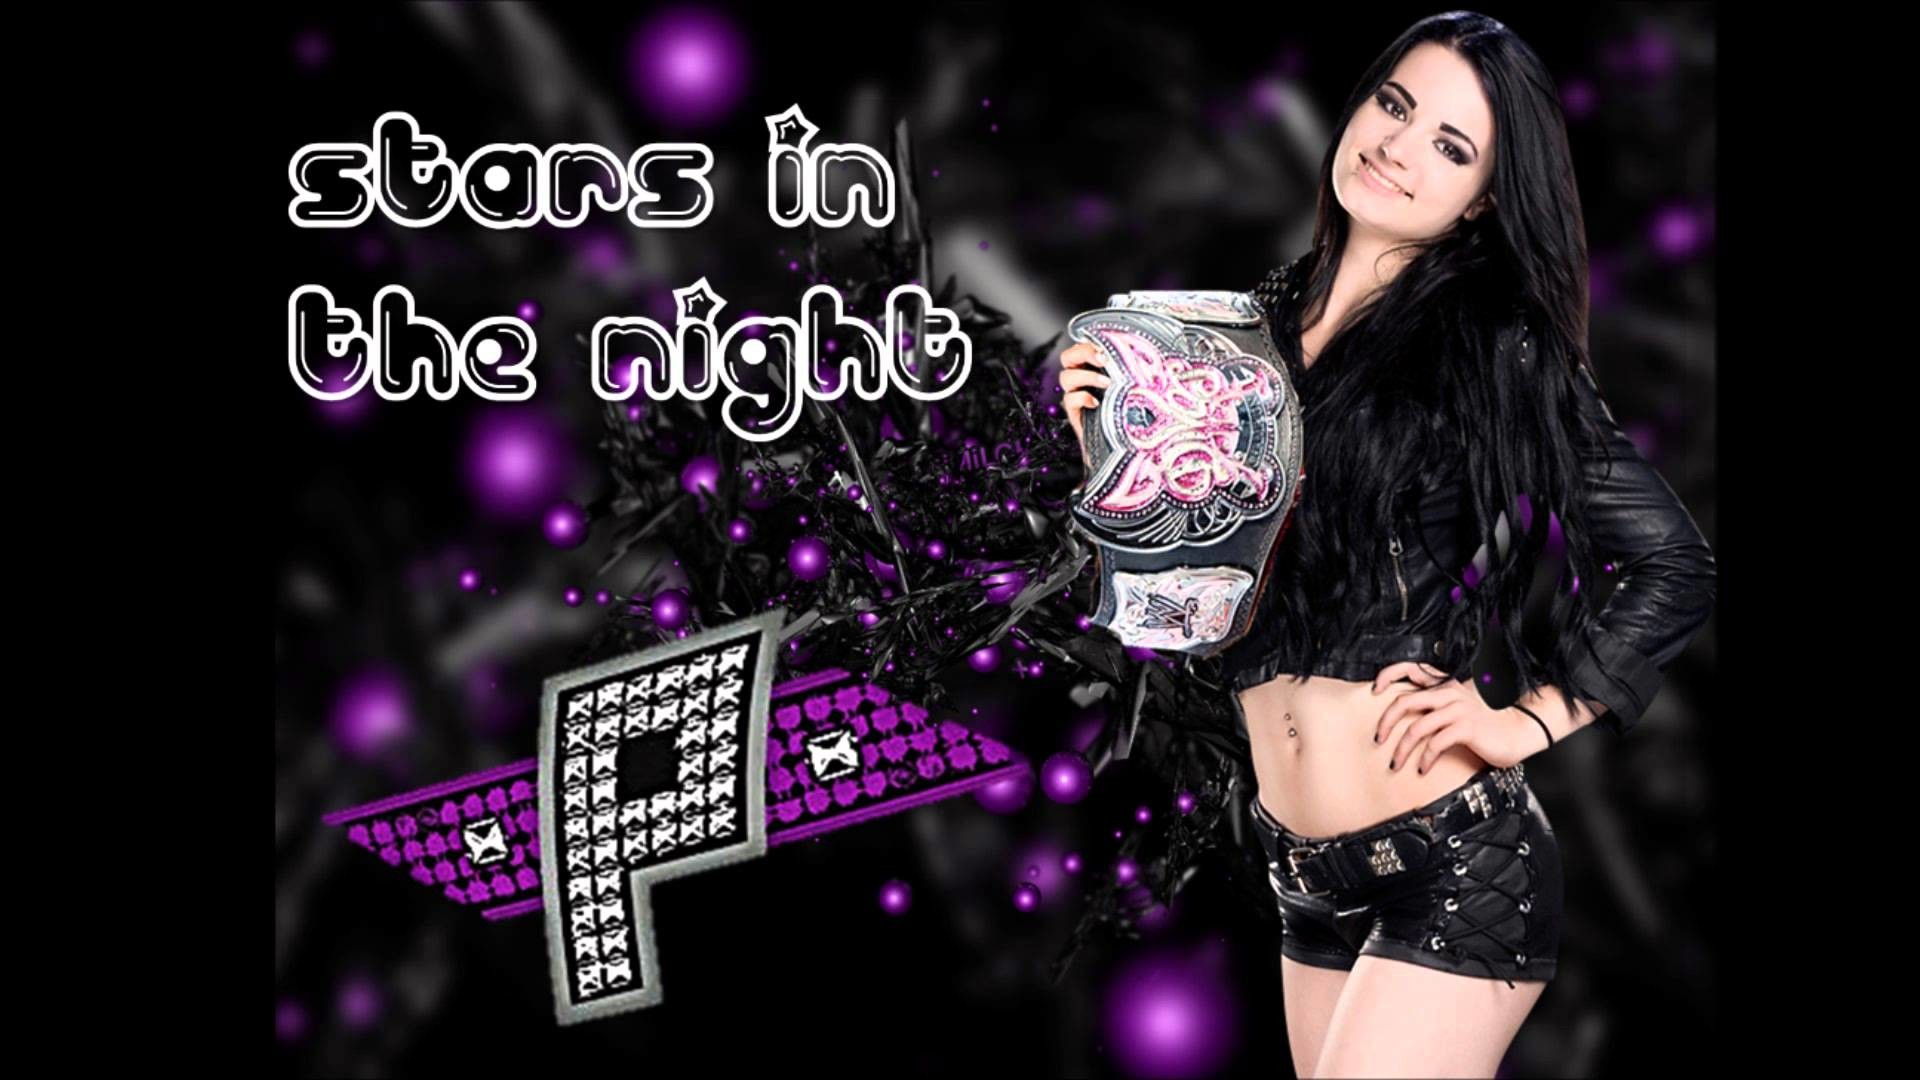 1920x1080 2014: Paige 2nd WWE Theme Song -"Stars In The Night" + Download Link -  YouTube